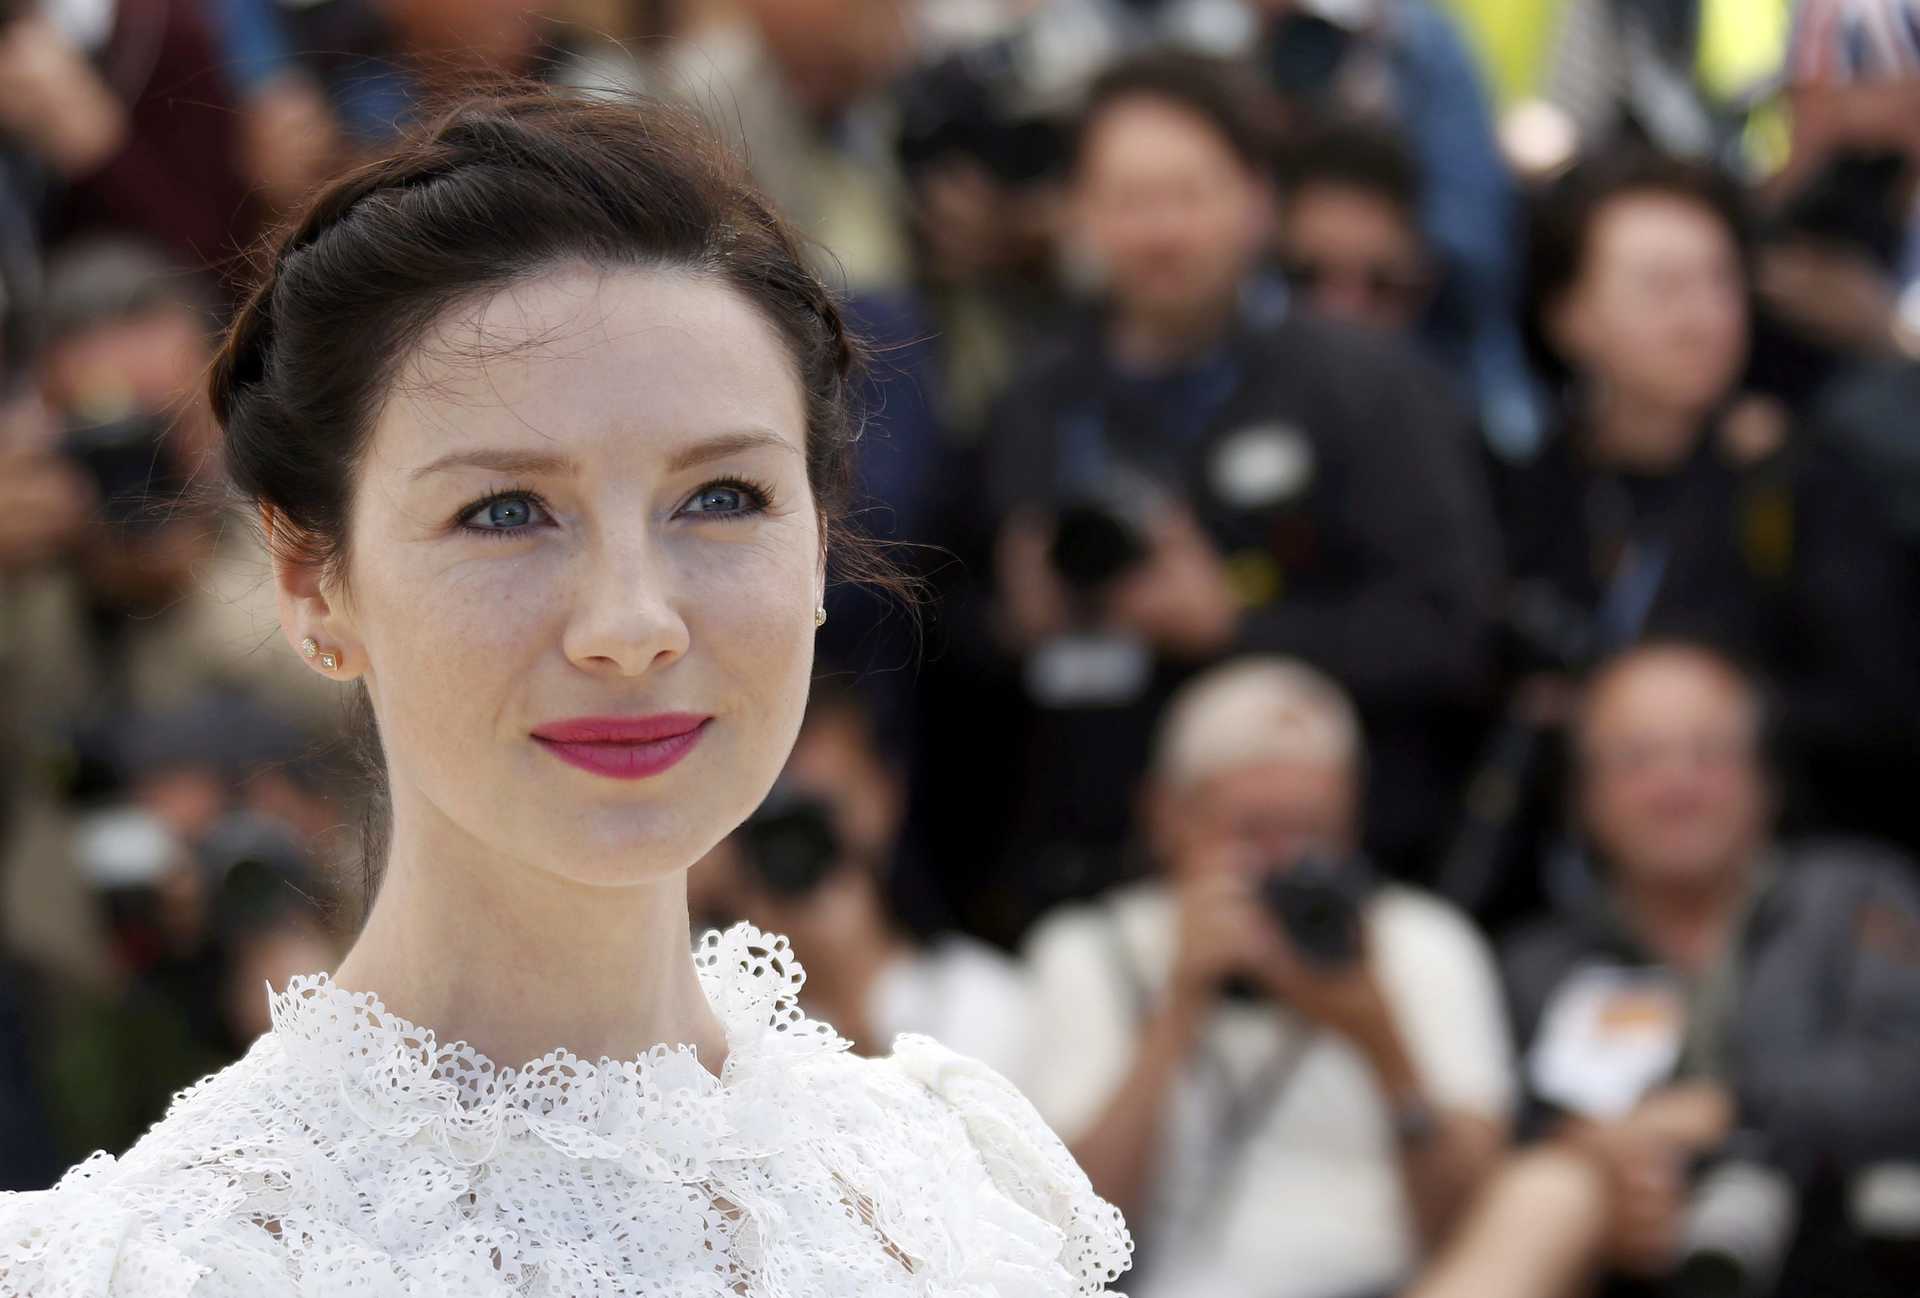 Cast member Caitriona Balfe poses during a photocall for the film 